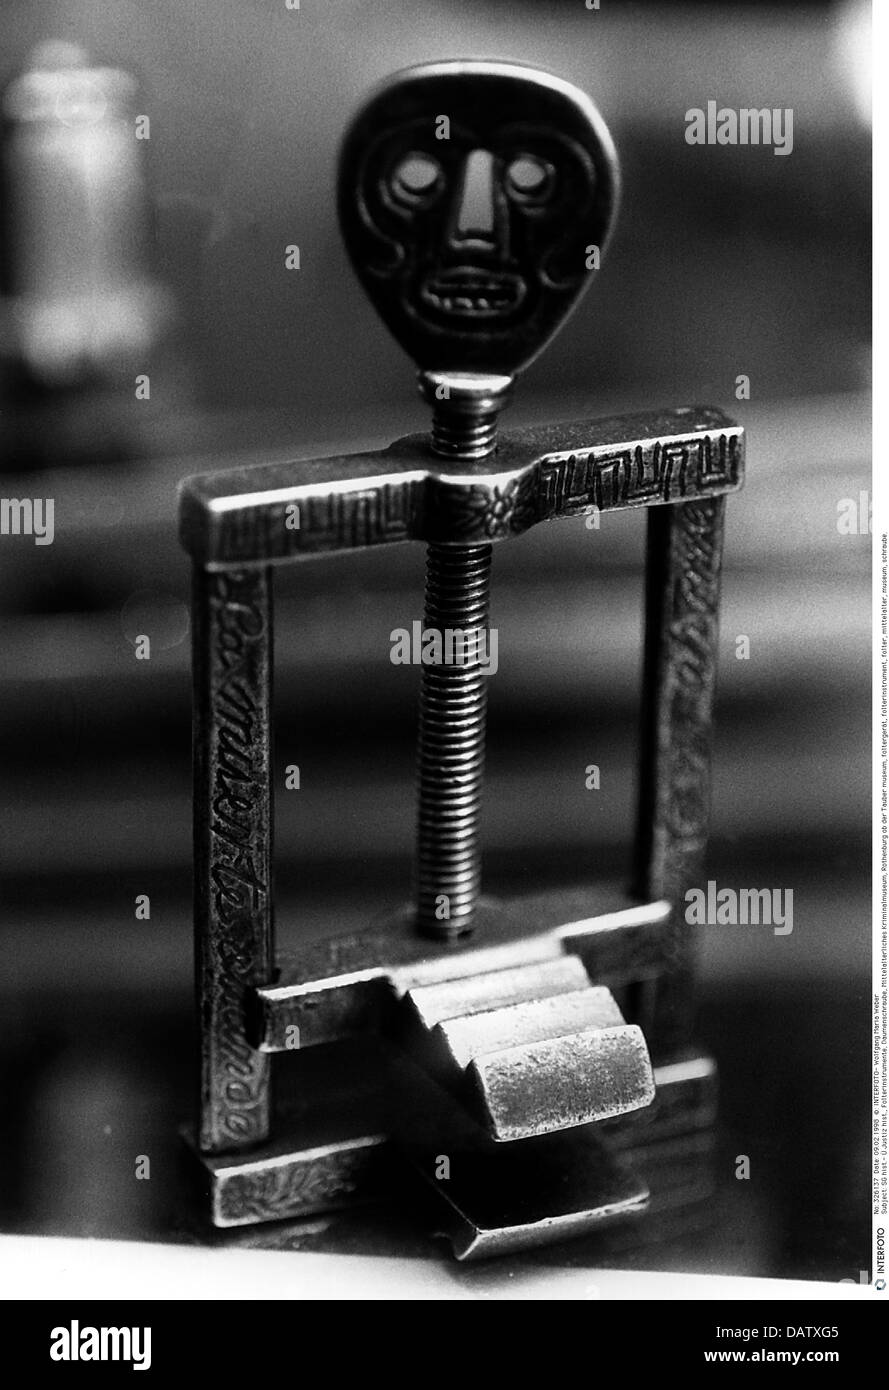 justice, instrument of torture, thumbscrew, museum of medieval crimes, Rothenburg ob der Tauber, historic, historical, thumbscrews, torture device, instruments of torture, torture devices, medieval times, Middle Ages, technics, Additional-Rights-Clearences-Not Available Stock Photo